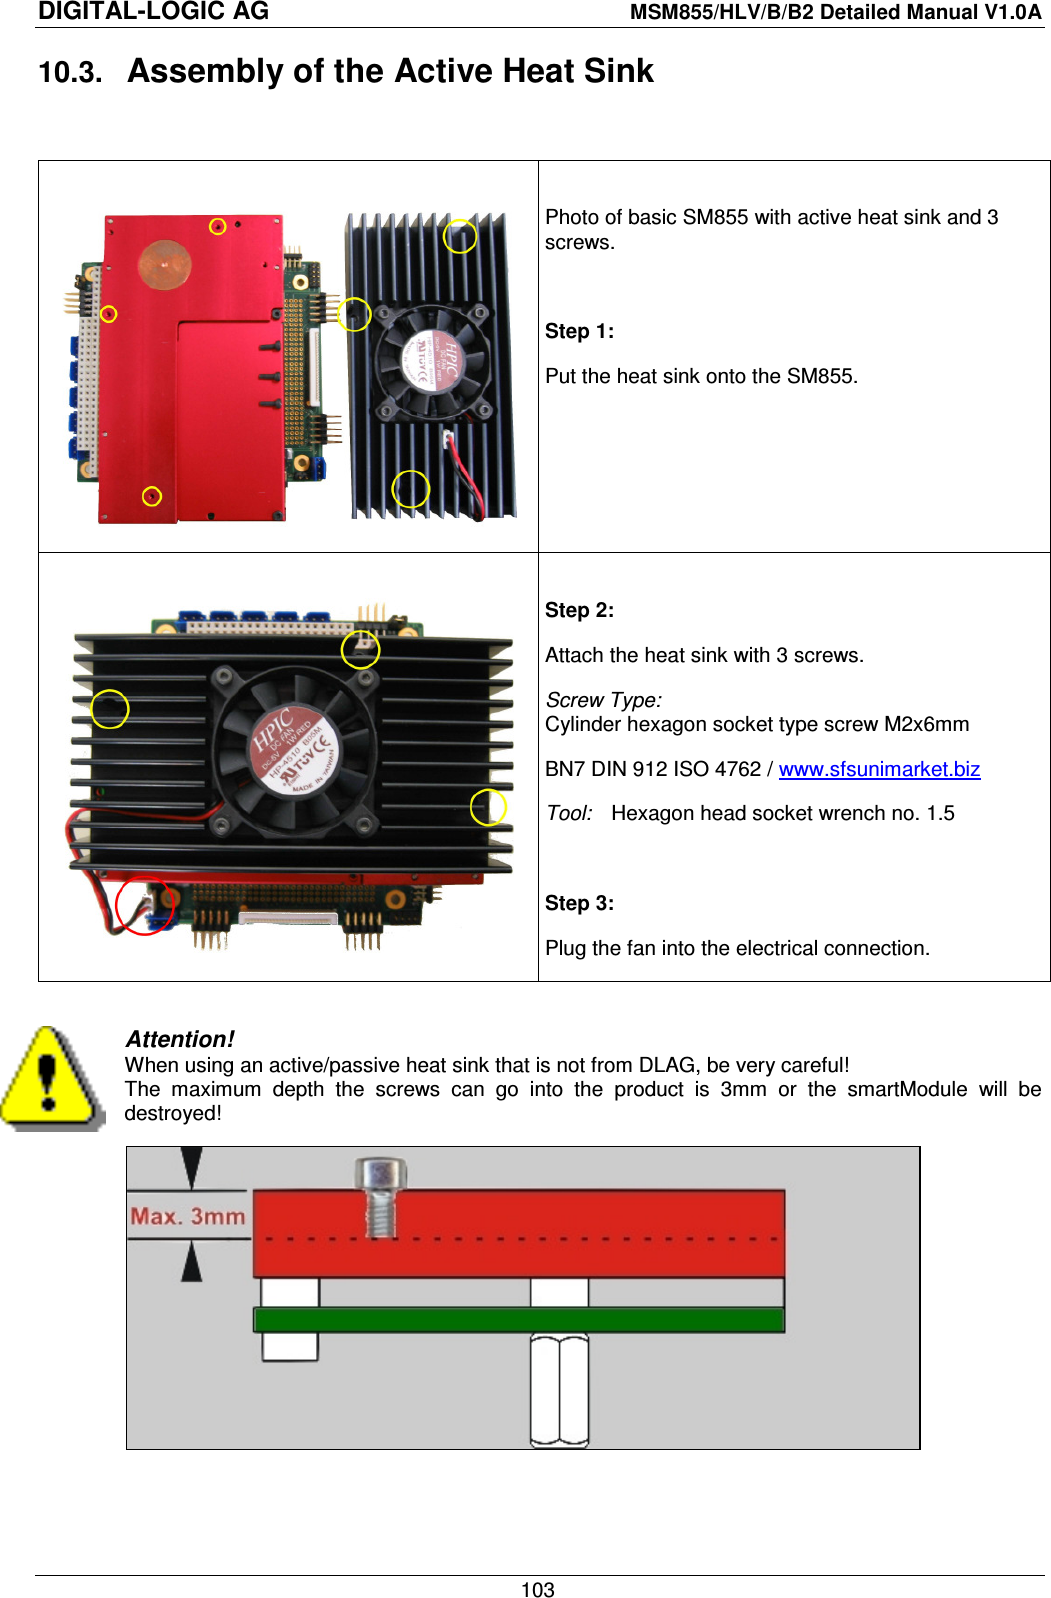 DIGITAL-LOGIC AG    MSM855/HLV/B/B2 Detailed Manual V1.0A    103 10.3.  Assembly of the Active Heat Sink     Photo of basic SM855 with active heat sink and 3 screws.  Step 1: Put the heat sink onto the SM855.    Step 2: Attach the heat sink with 3 screws. Screw Type: Cylinder hexagon socket type screw M2x6mm BN7 DIN 912 ISO 4762 / www.sfsunimarket.biz  Tool:  Hexagon head socket wrench no. 1.5  Step 3: Plug the fan into the electrical connection.  Attention! When using an active/passive heat sink that is not from DLAG, be very careful! The  maximum  depth  the  screws  can  go  into  the  product  is  3mm  or  the  smartModule  will  be destroyed!     